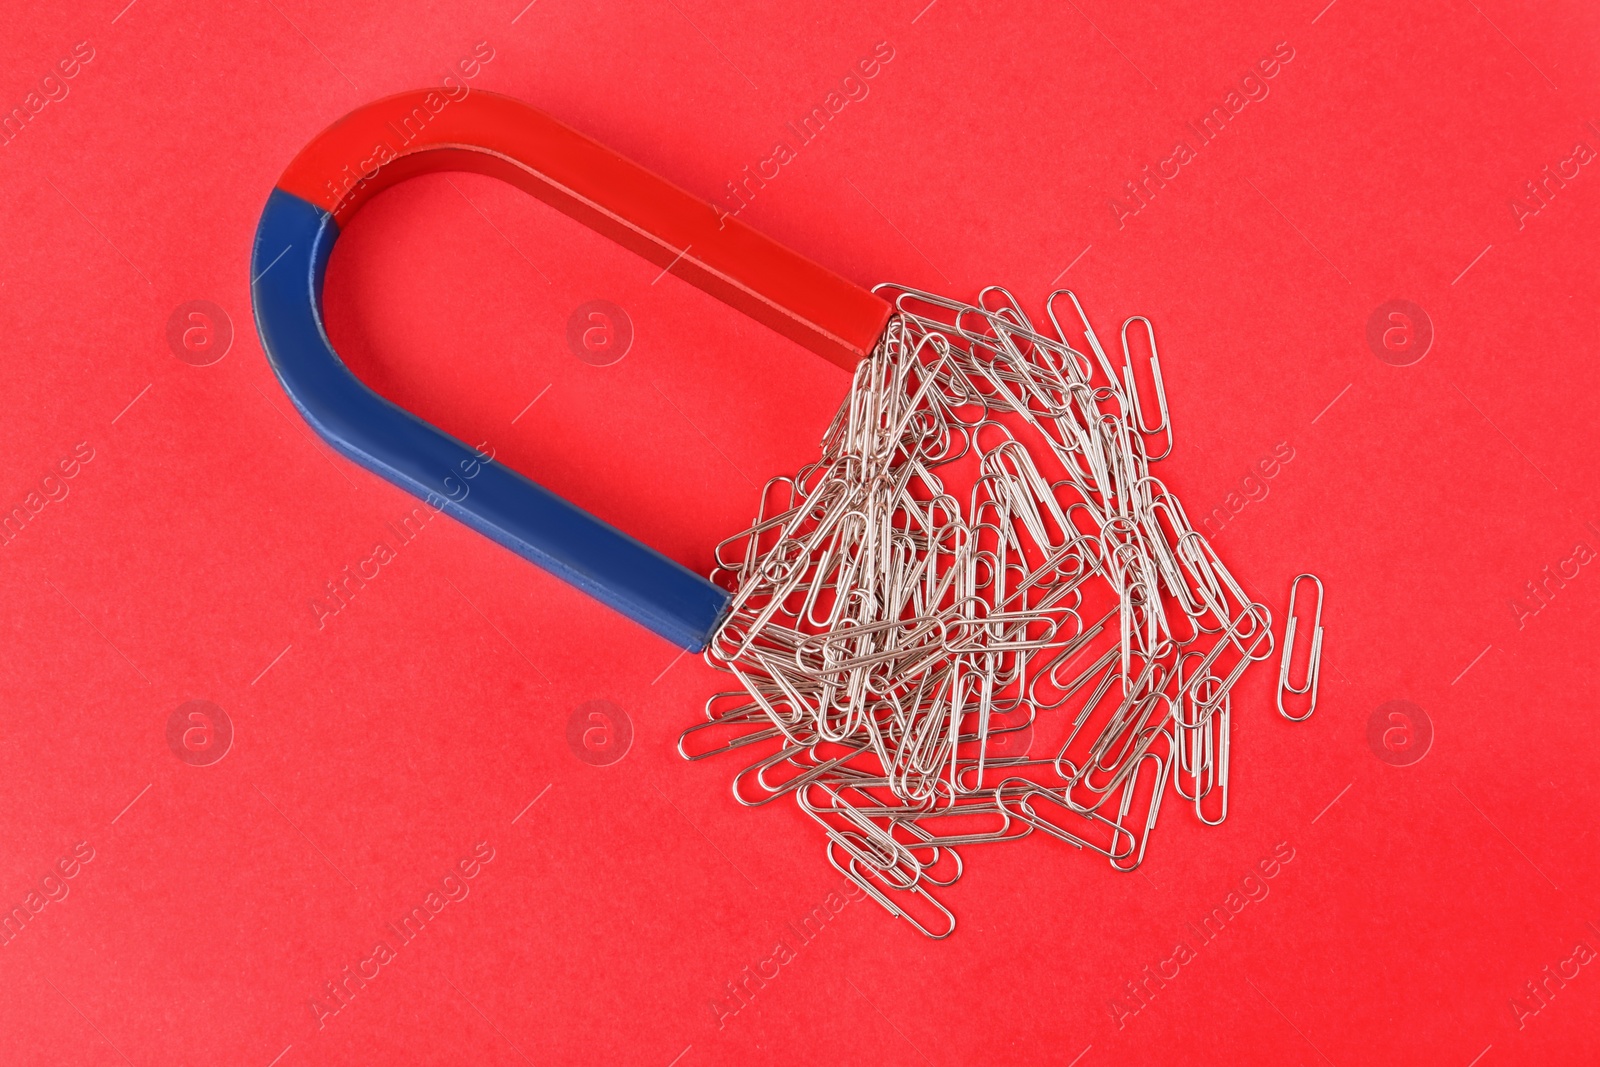 Photo of Magnet attracting paper clips on red background, flat lay